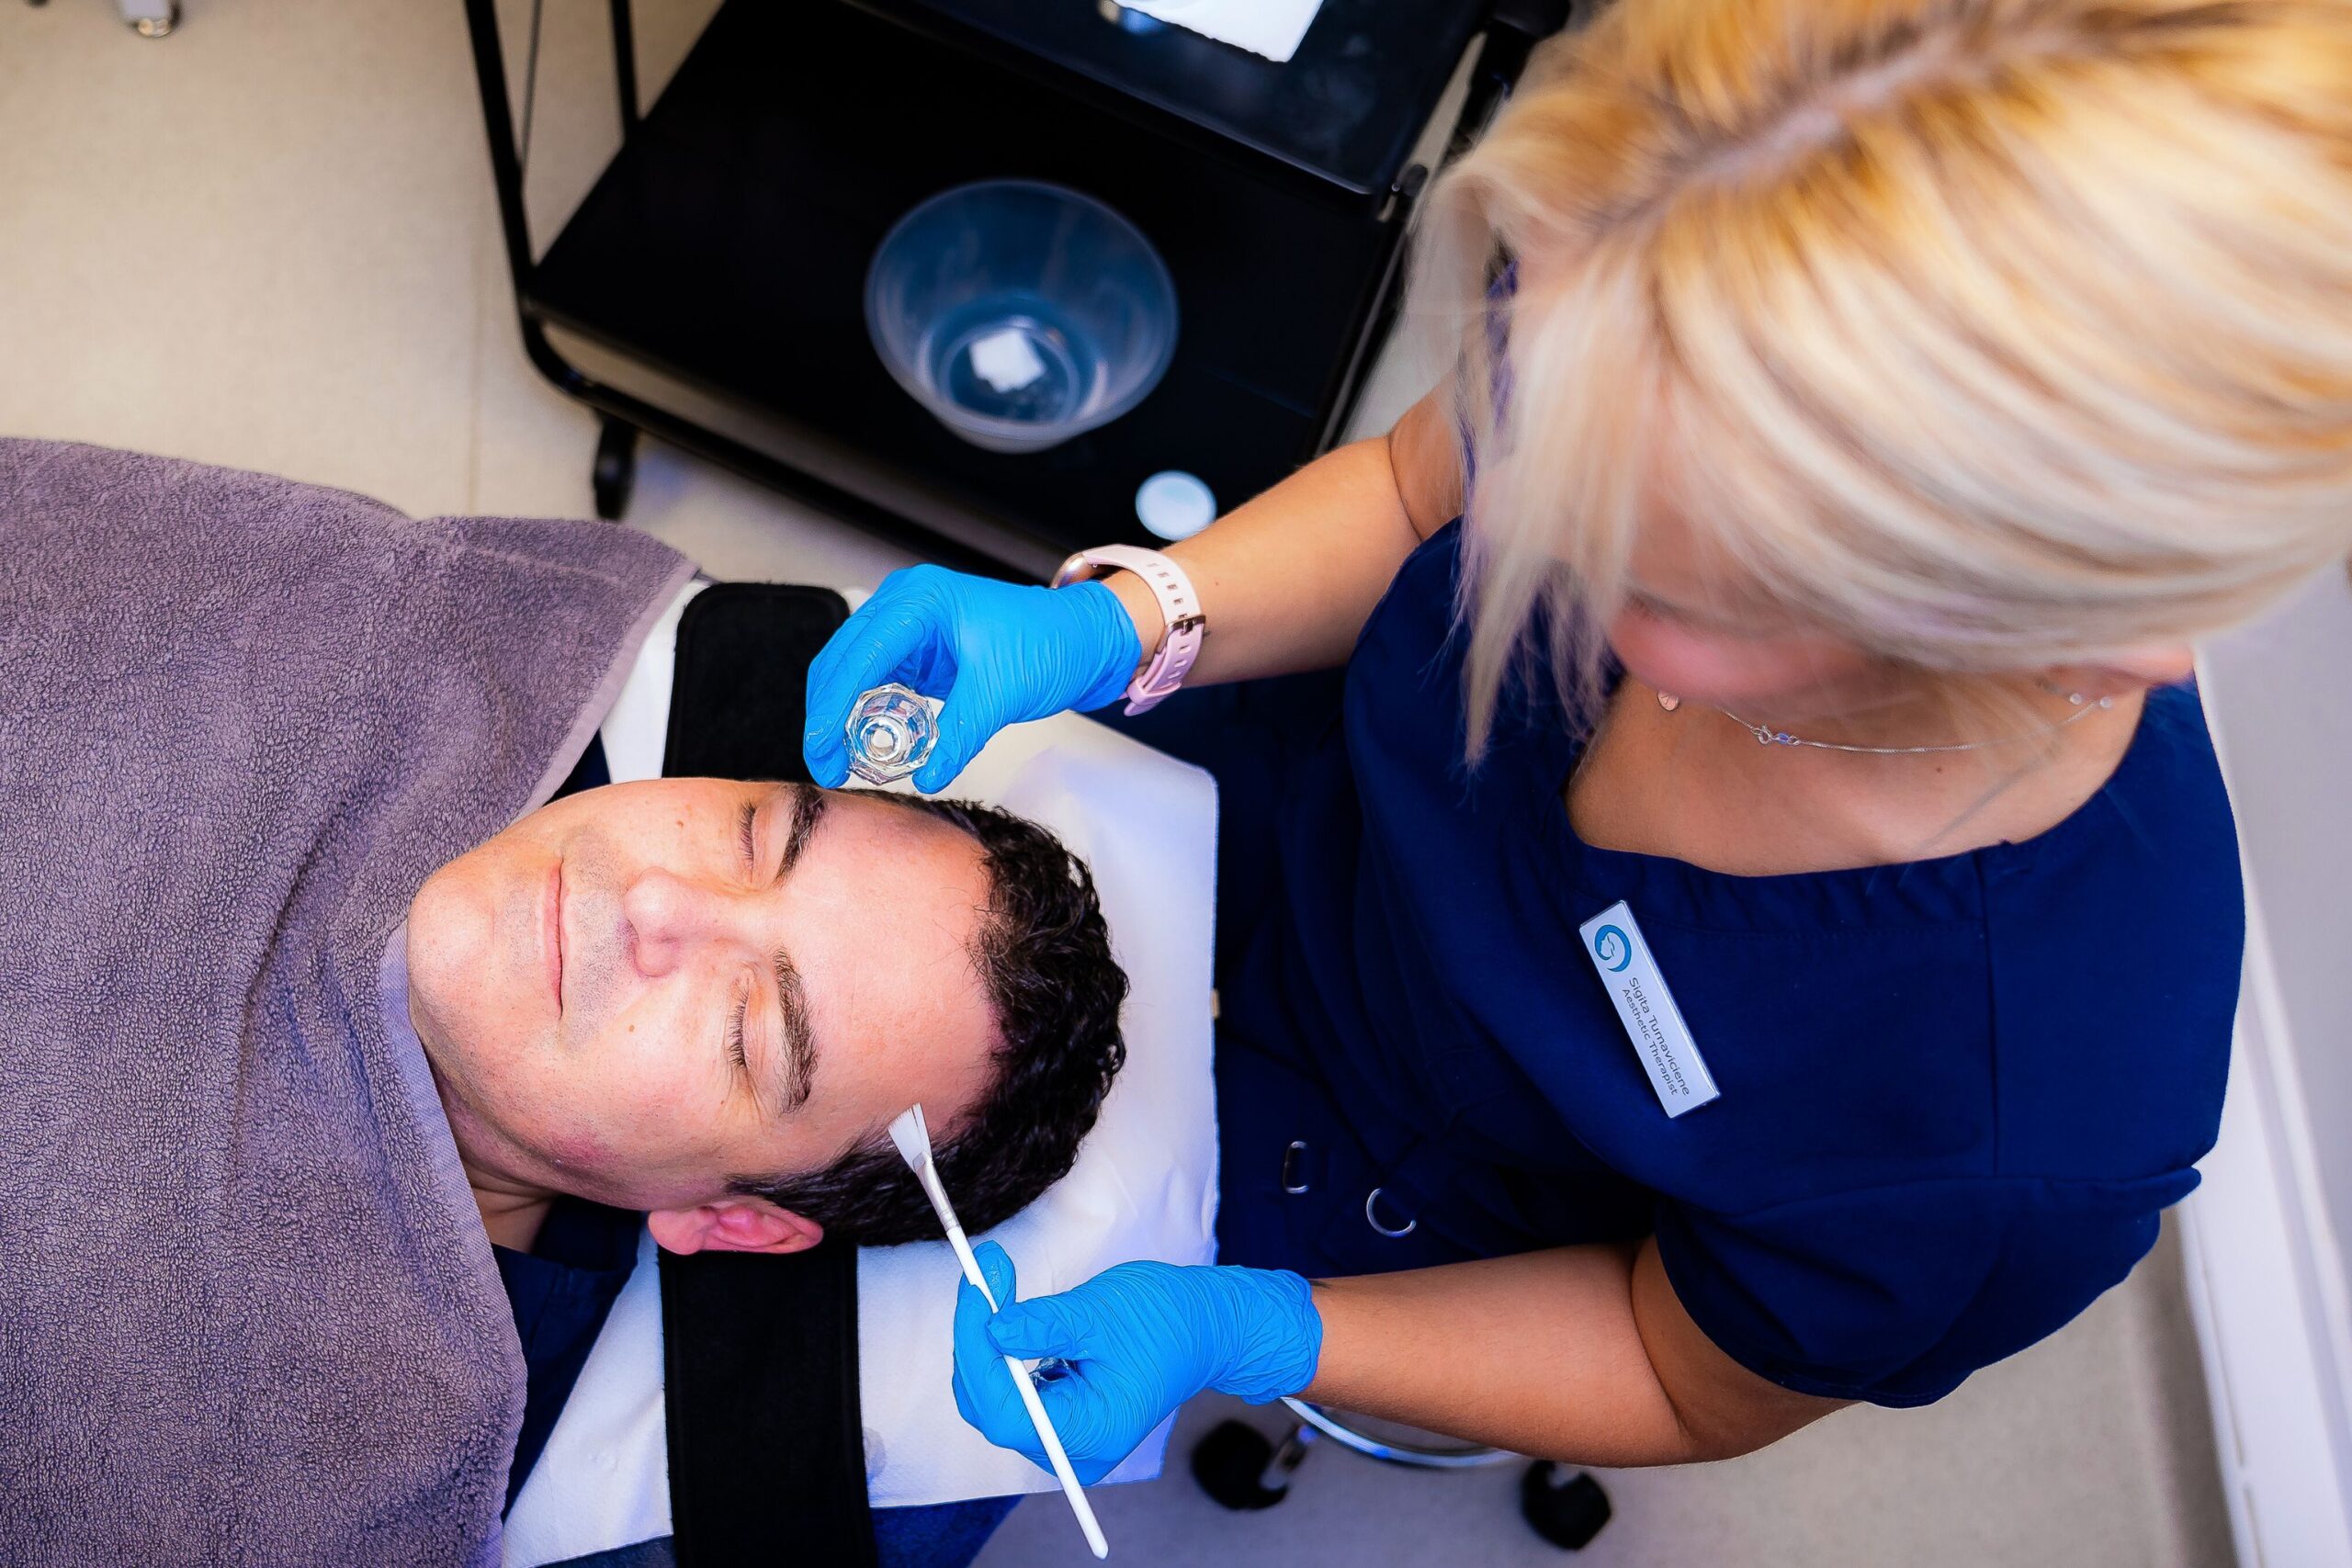 Chemical peels for dull skin at Freyja Medical in Wrexham, Nantwich and Cheshire